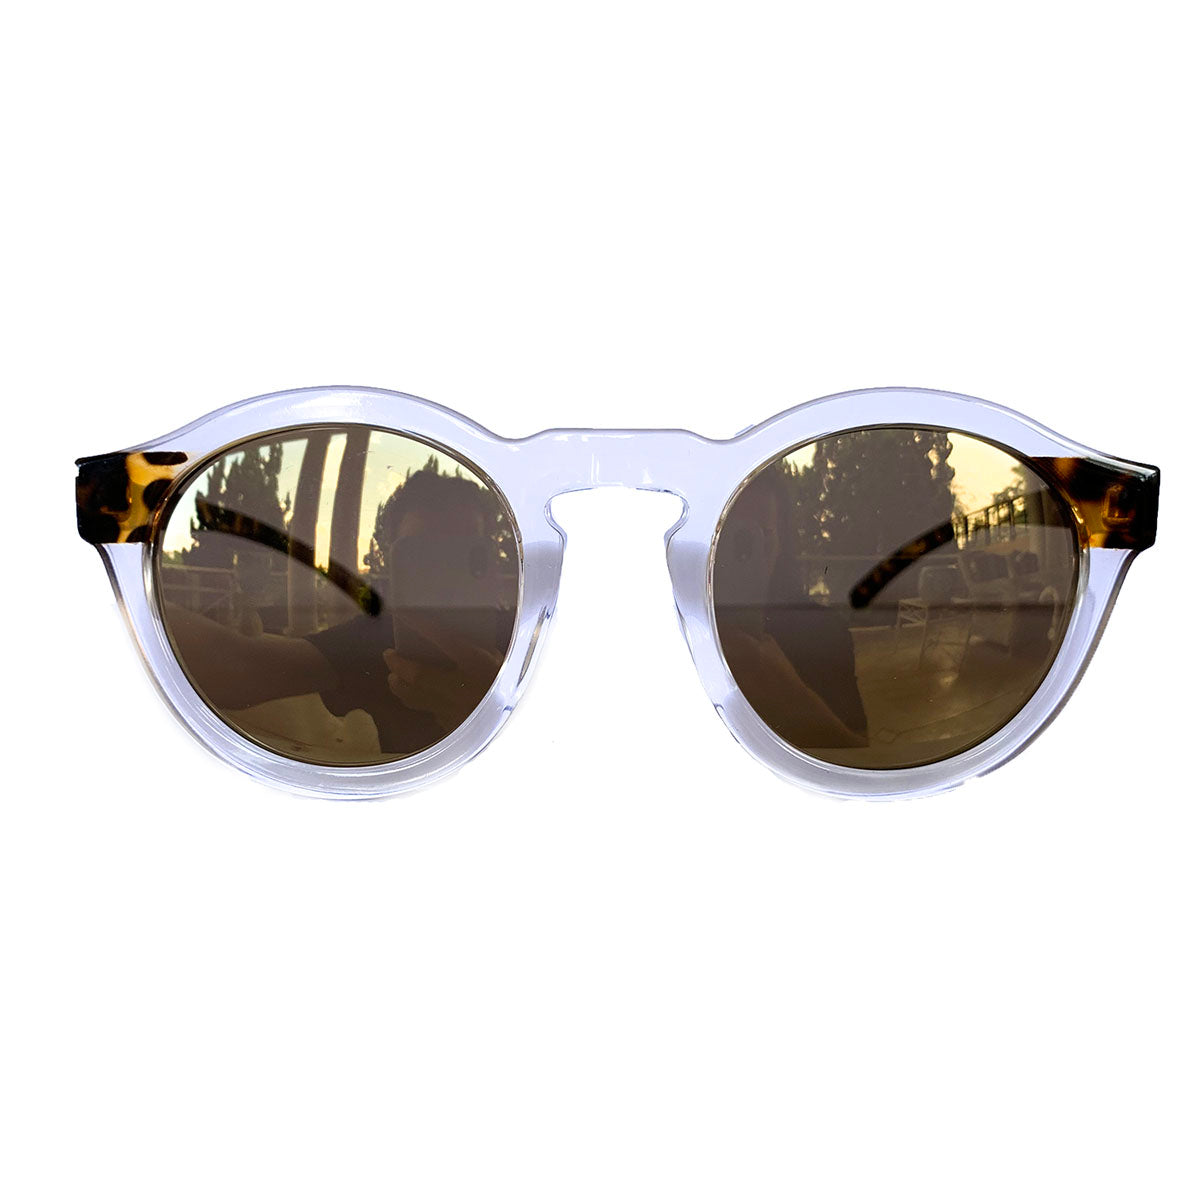 Round Transparent Sunglasses w/ Animal Print Arms and Golden Lenses